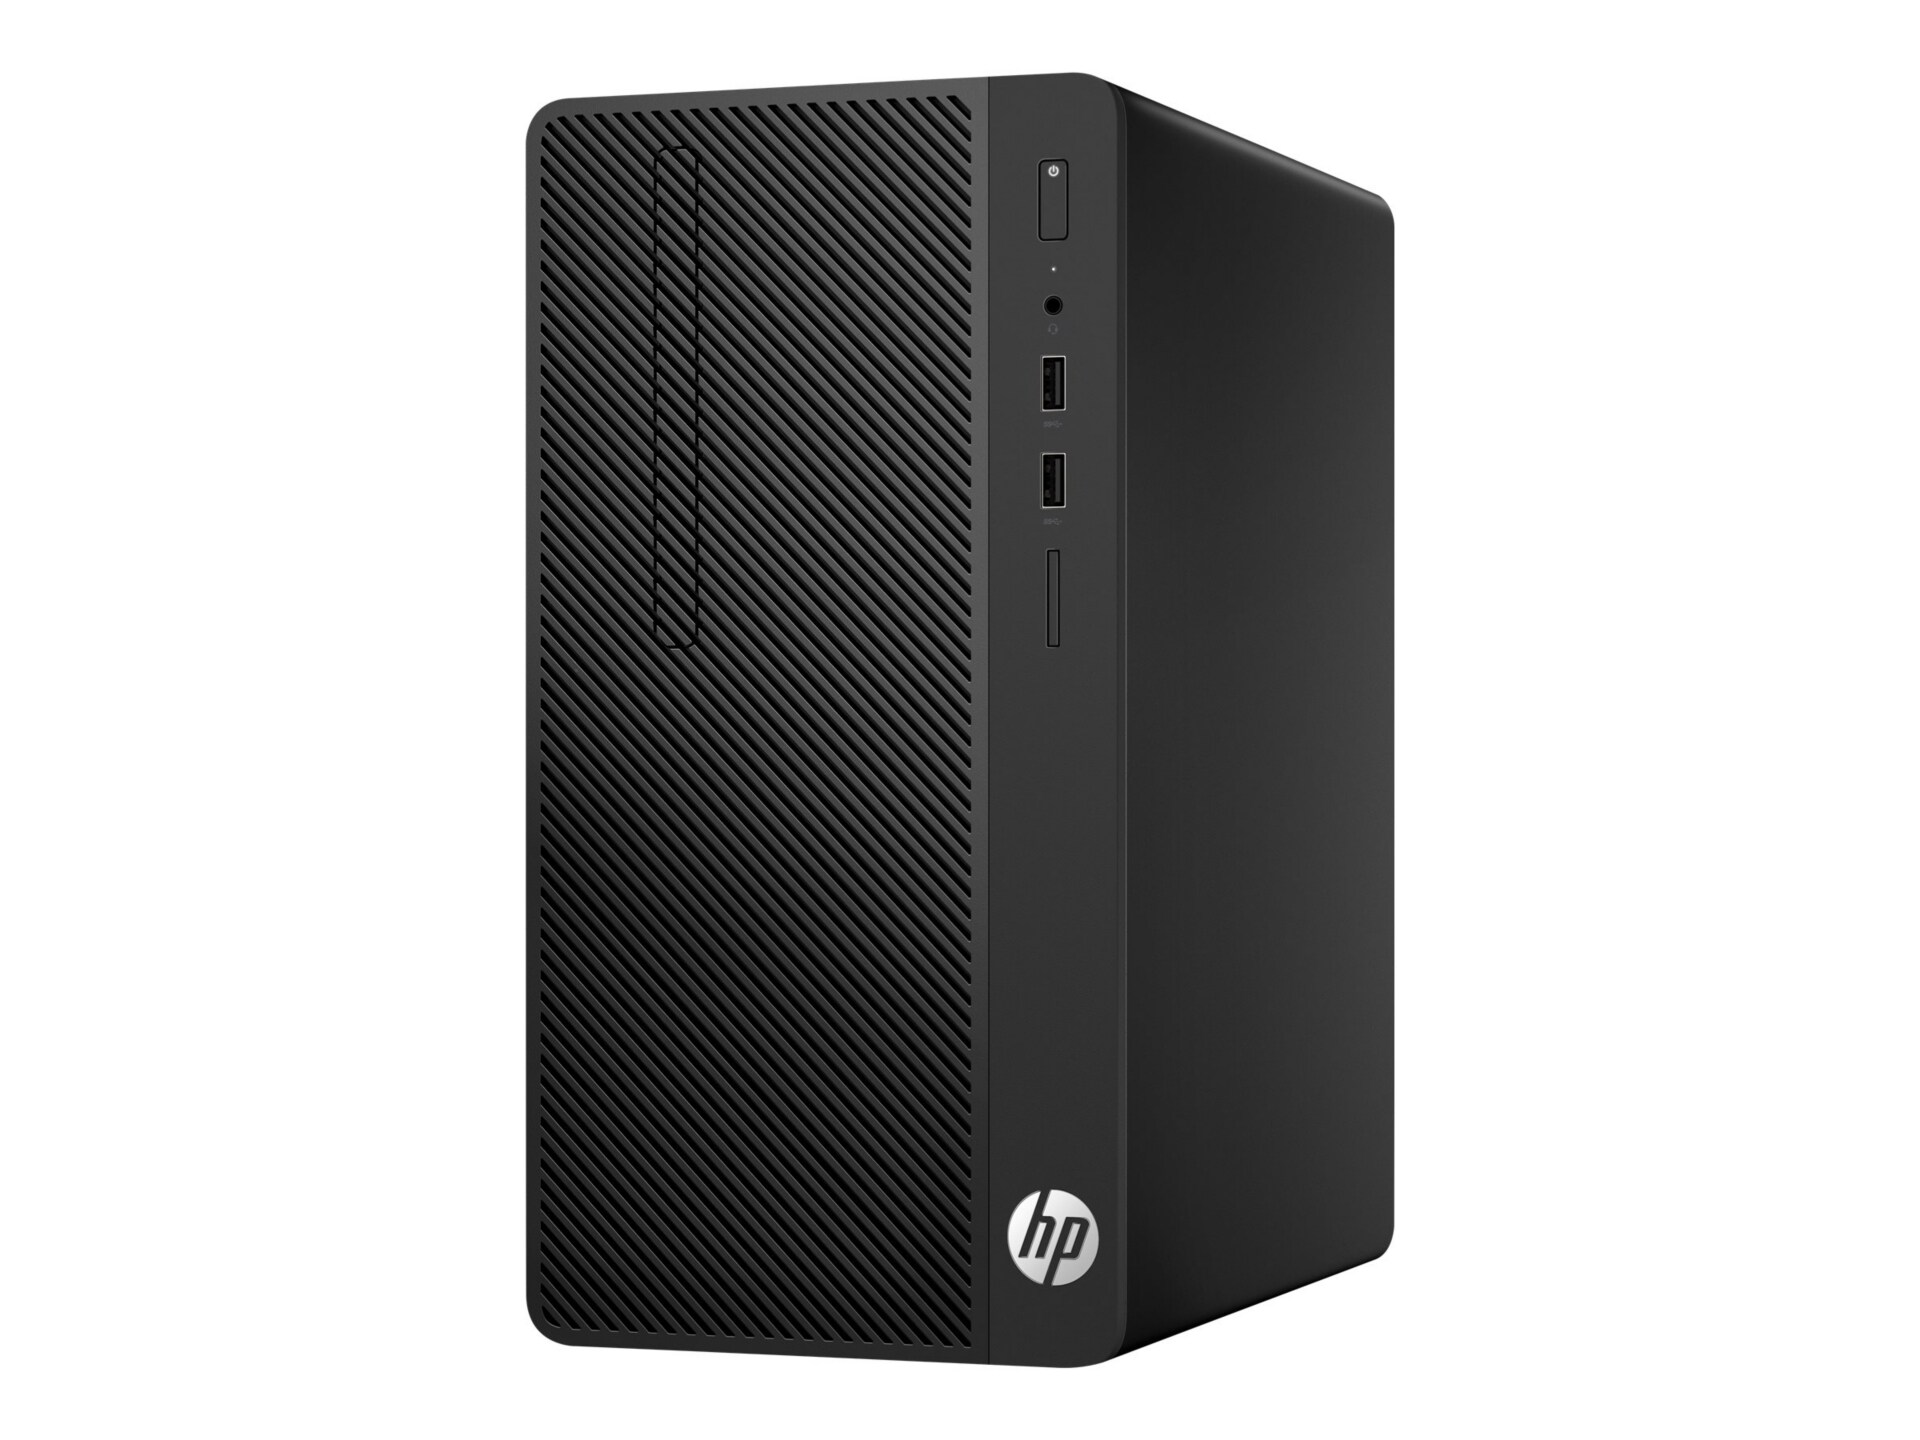 HP 280 G3 - micro tower - Core i5 7500 3.4 GHz - 4 GB - 500 GB